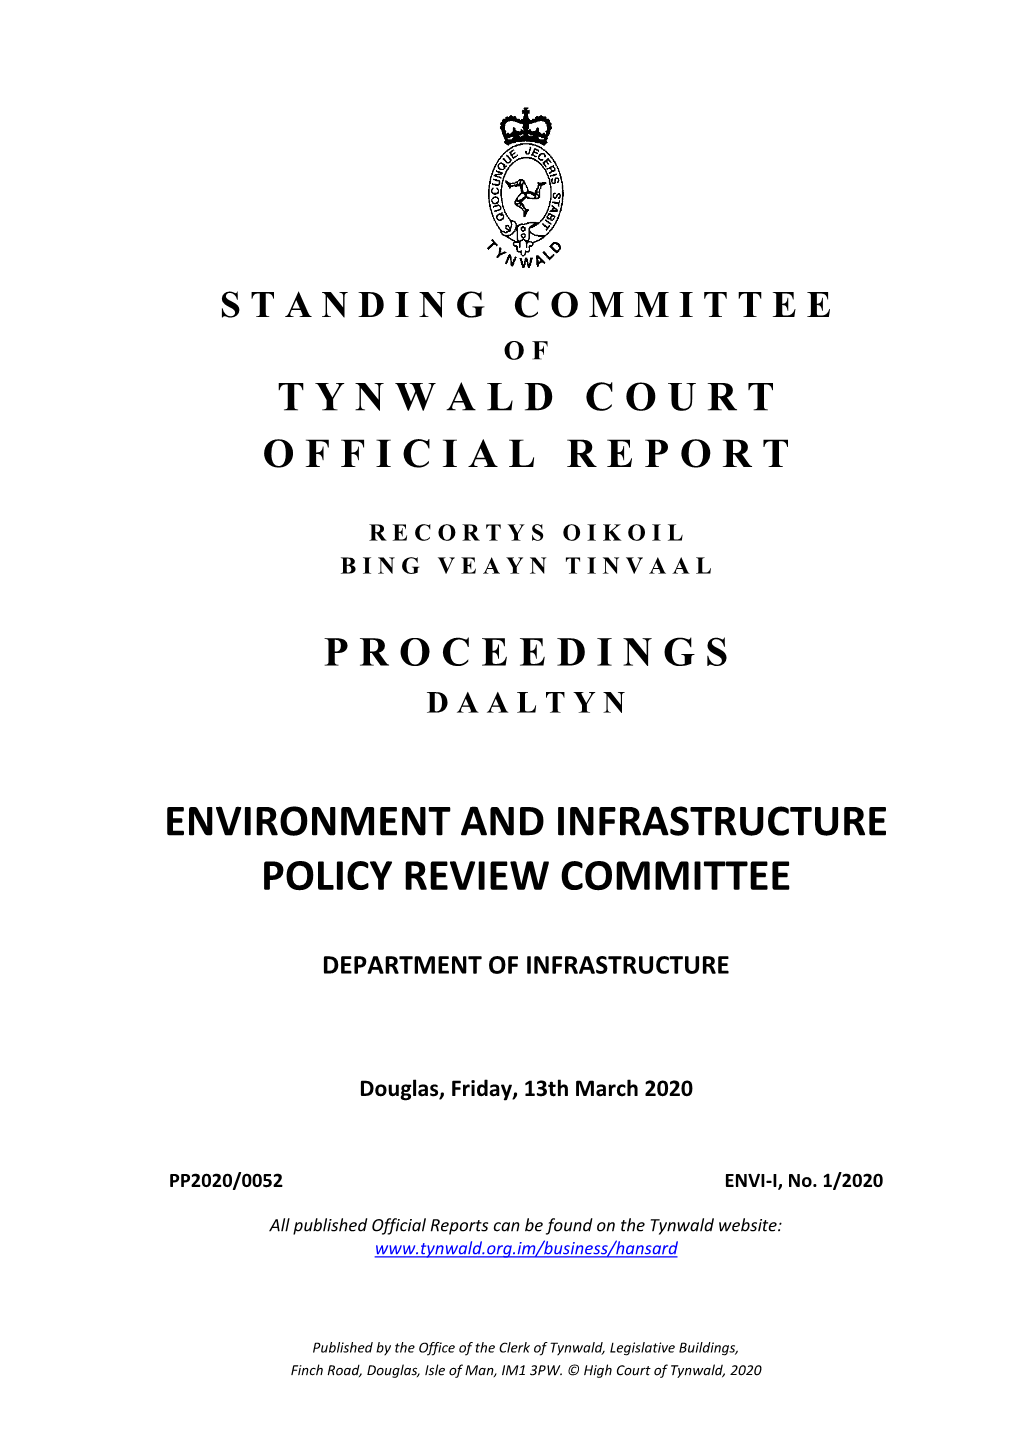 Environment and Infrastructure Policy Review Committee